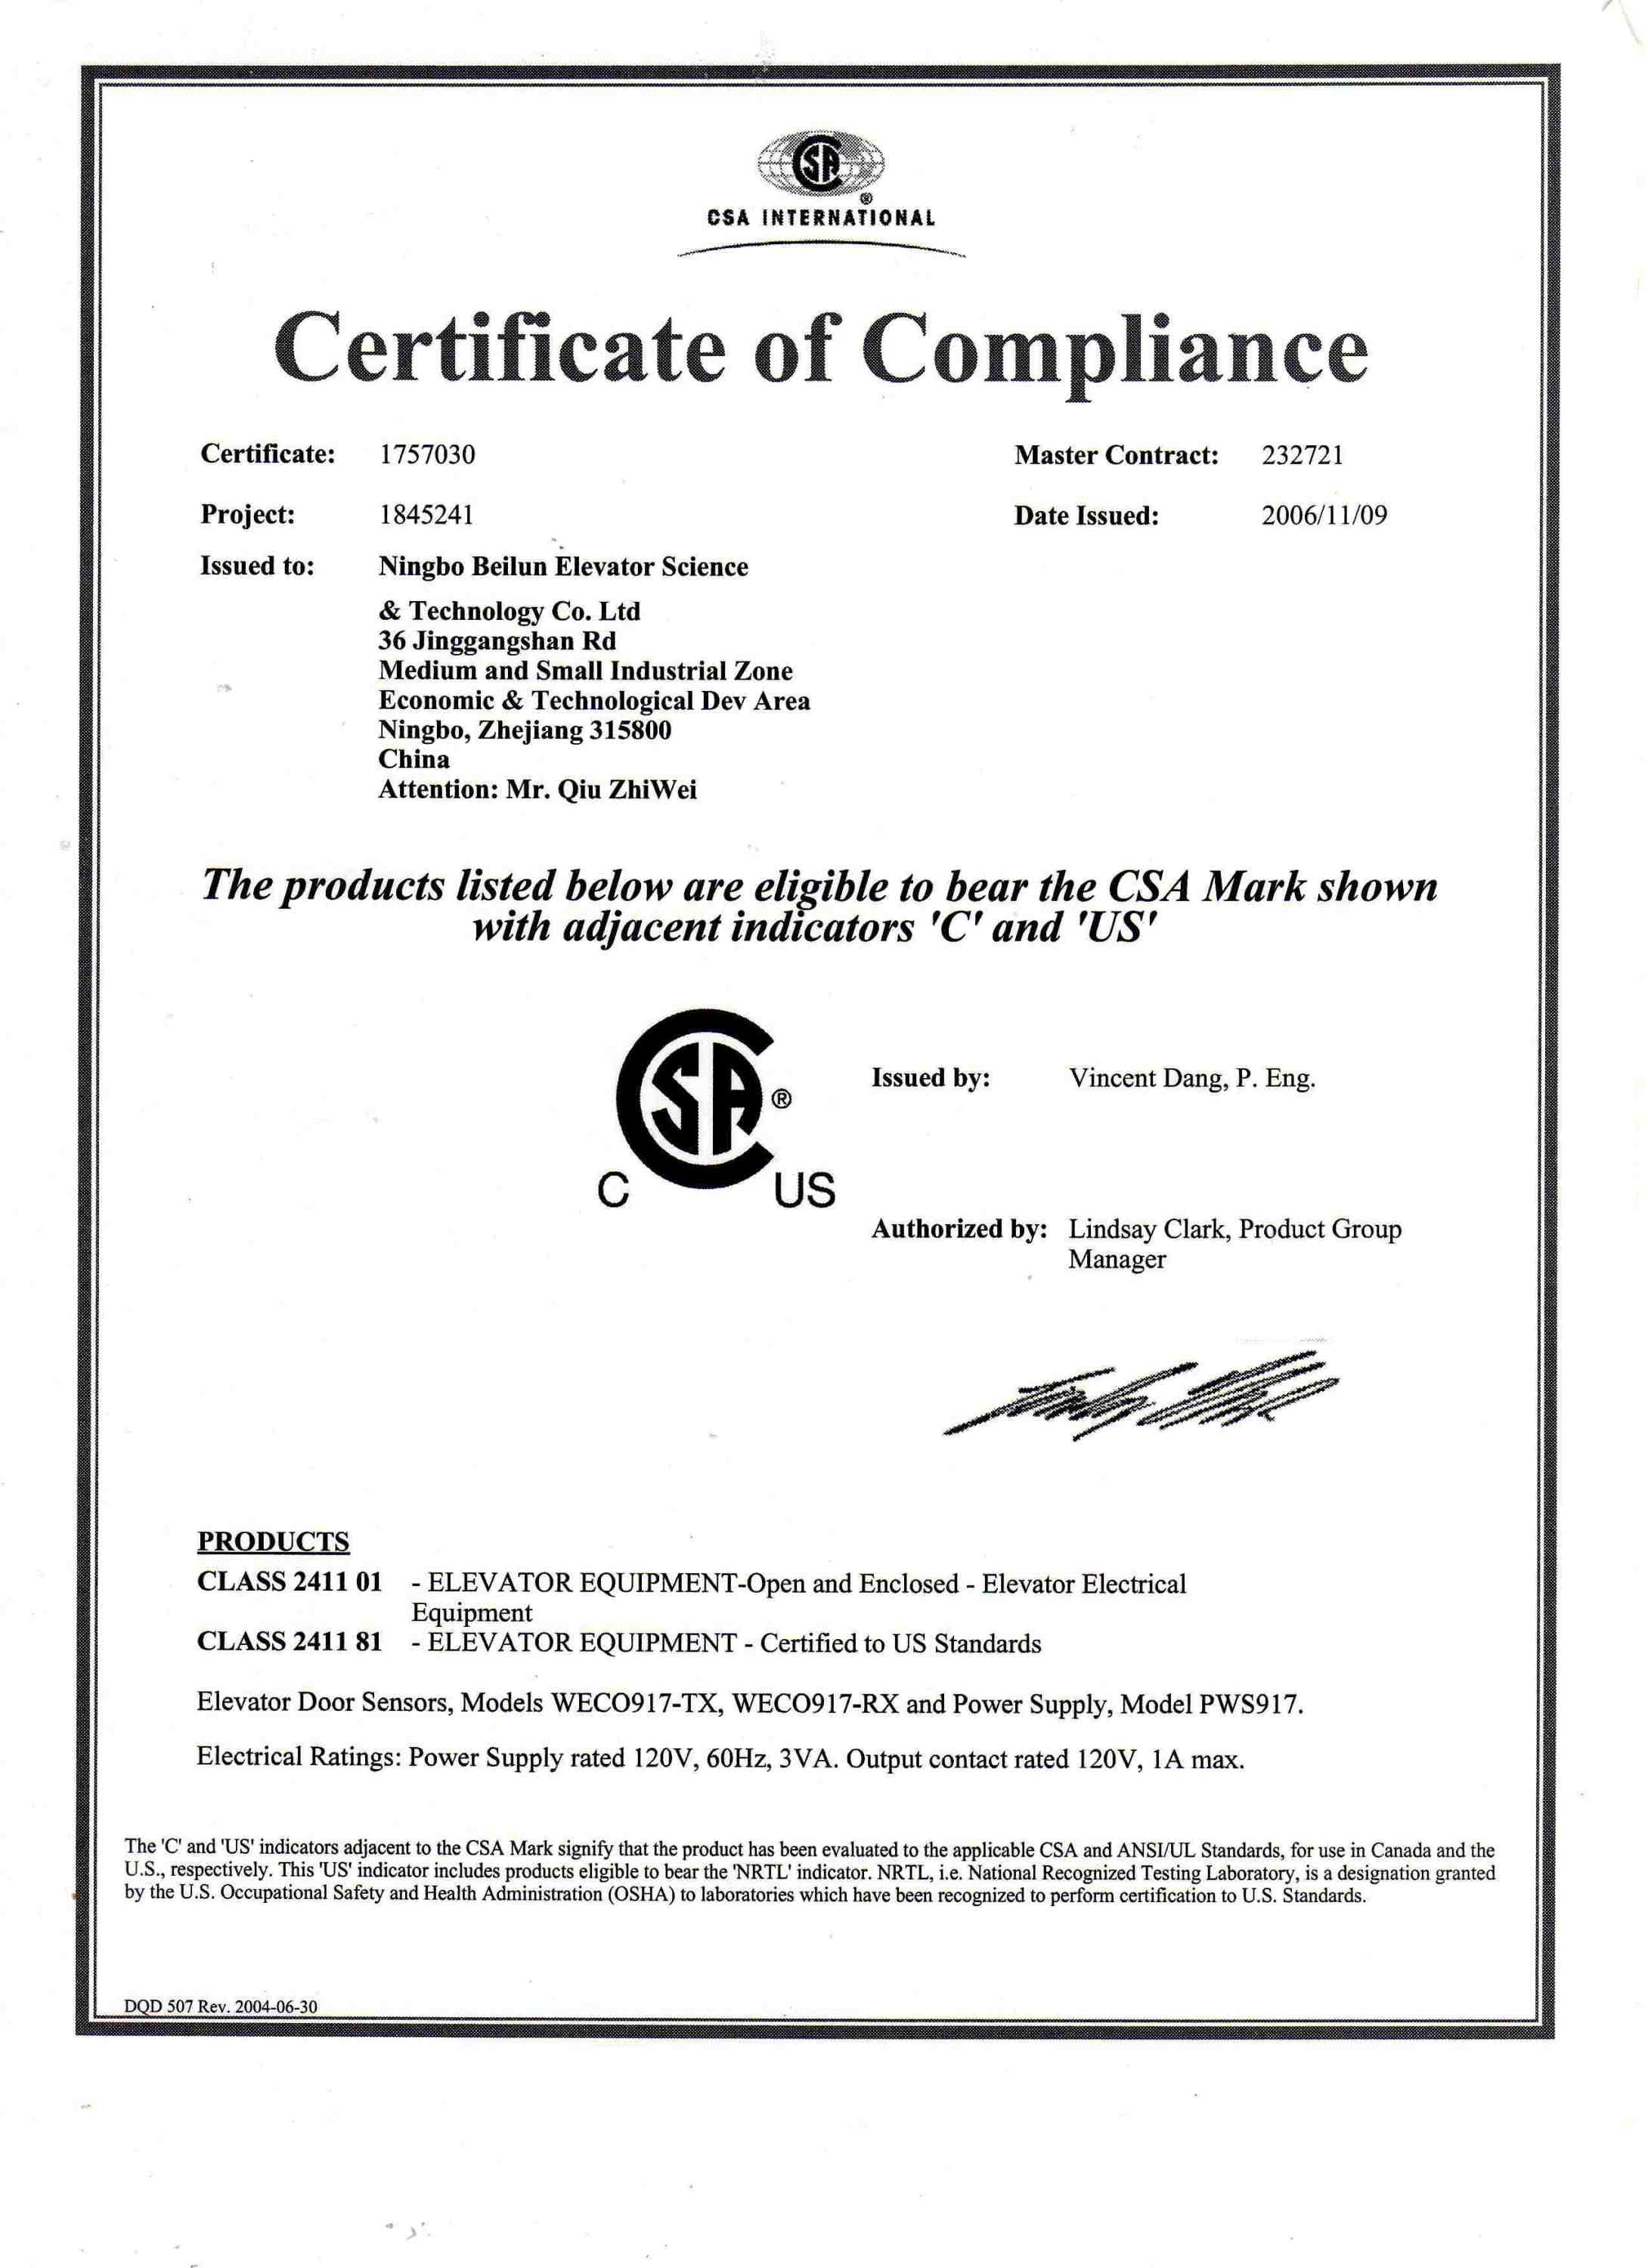 The North American CSA certification